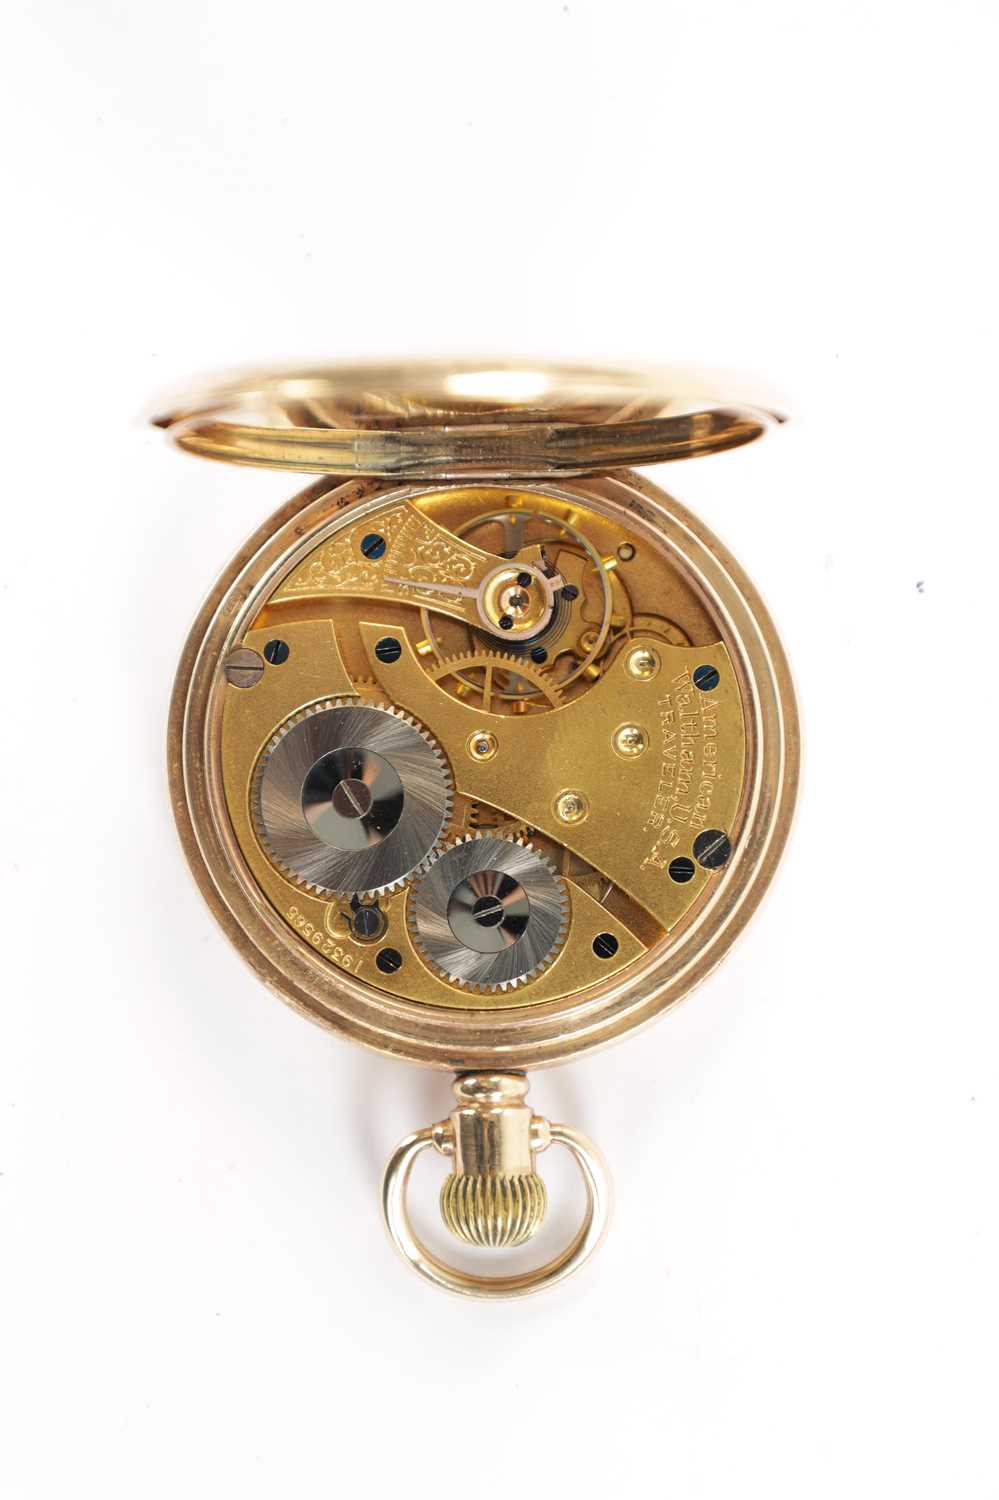 A 1920’S WALTHAM 9CT GOLD FULL HUNTER POCKET WATCH - Image 4 of 7